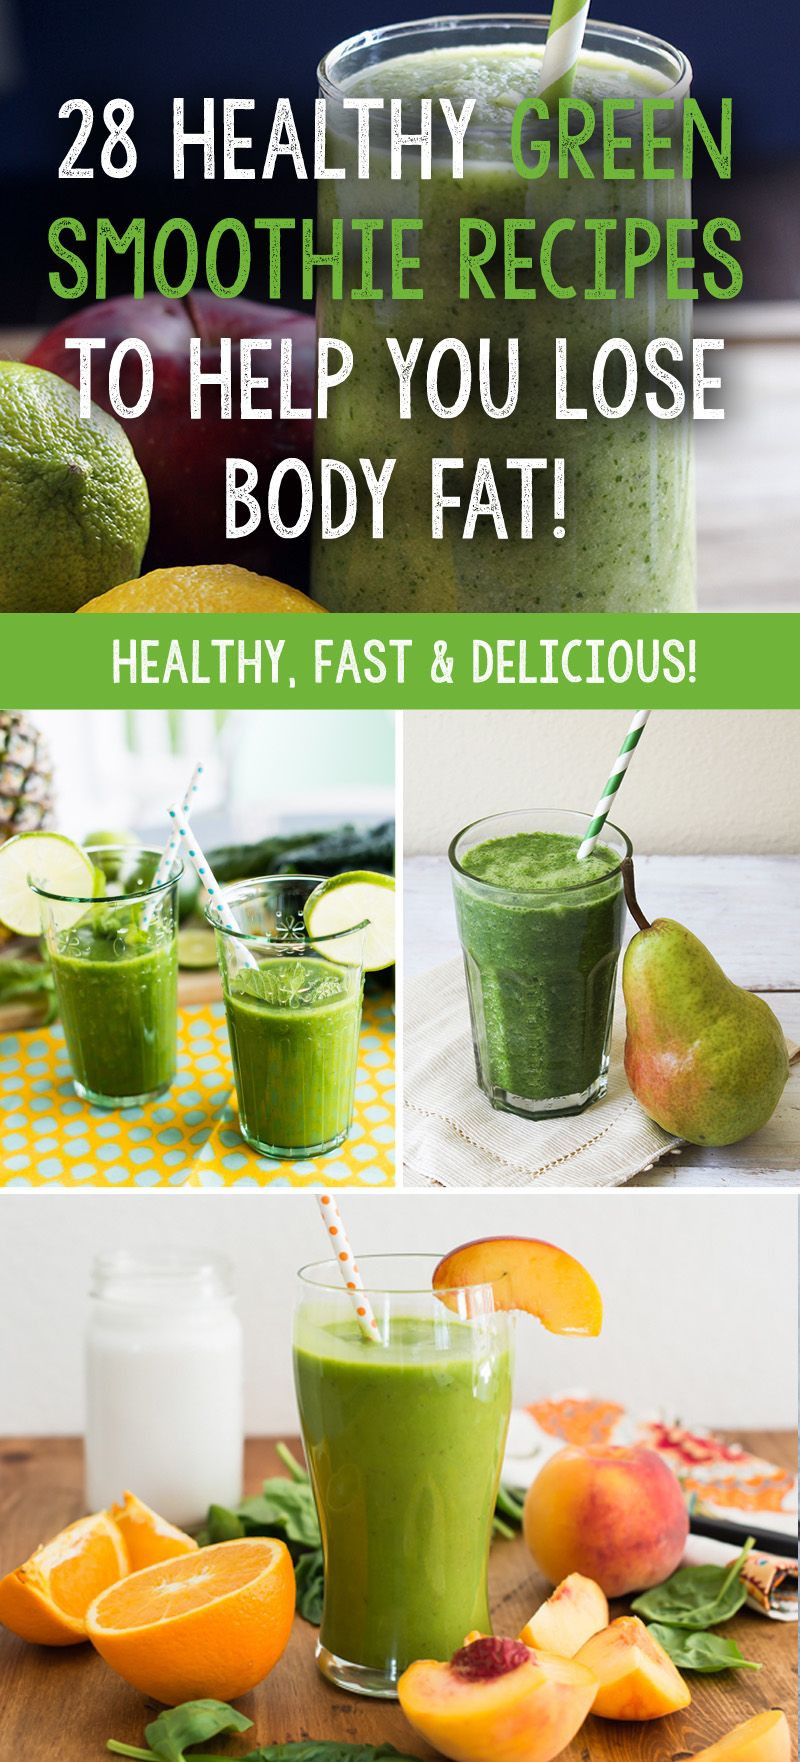 Top 22 Healthy Green Smoothie Recipes for Weight Loss - Best Recipes